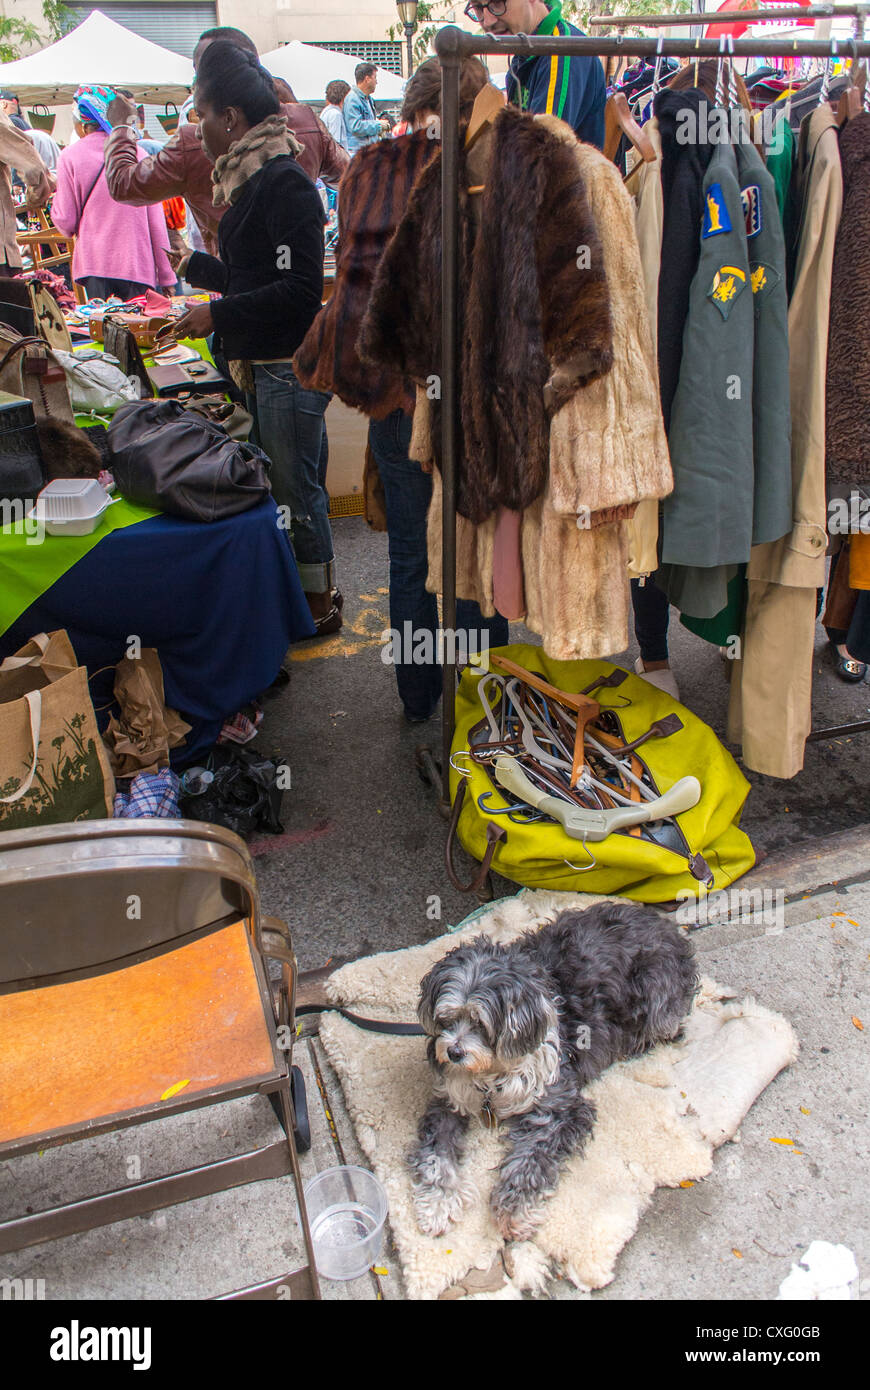 New York, NY, USA, People Shopping in Vintage Old Clothing Stall il Brooklyn Street Festival, 'Atlantic Antic', mercato delle pulci, Urban Pets Foto Stock